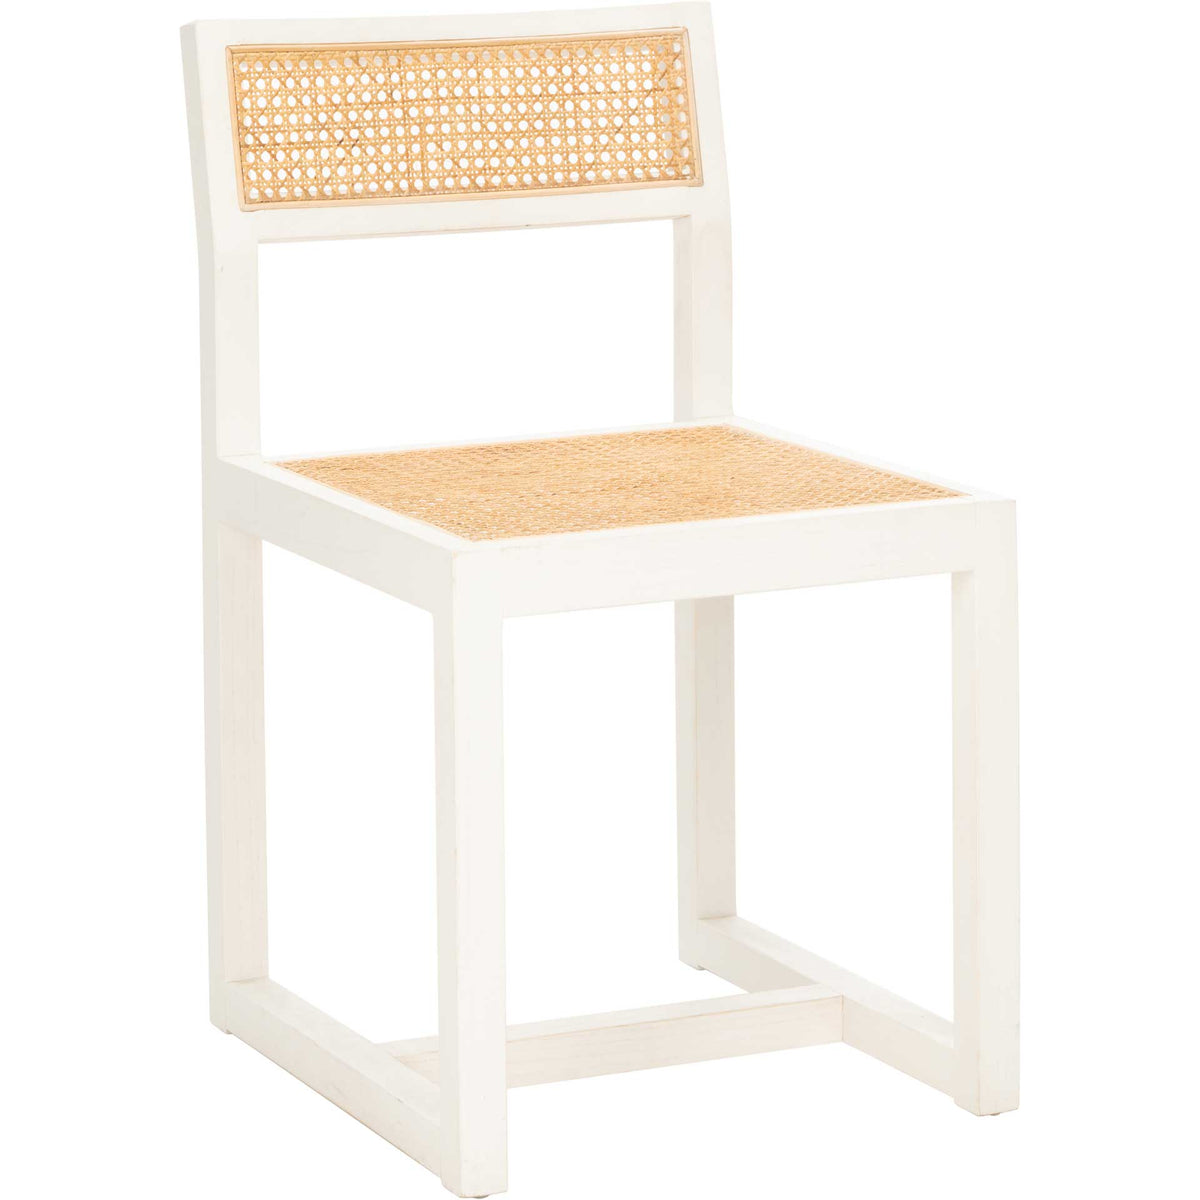 Bellini Cane Dining Chair White/Natural